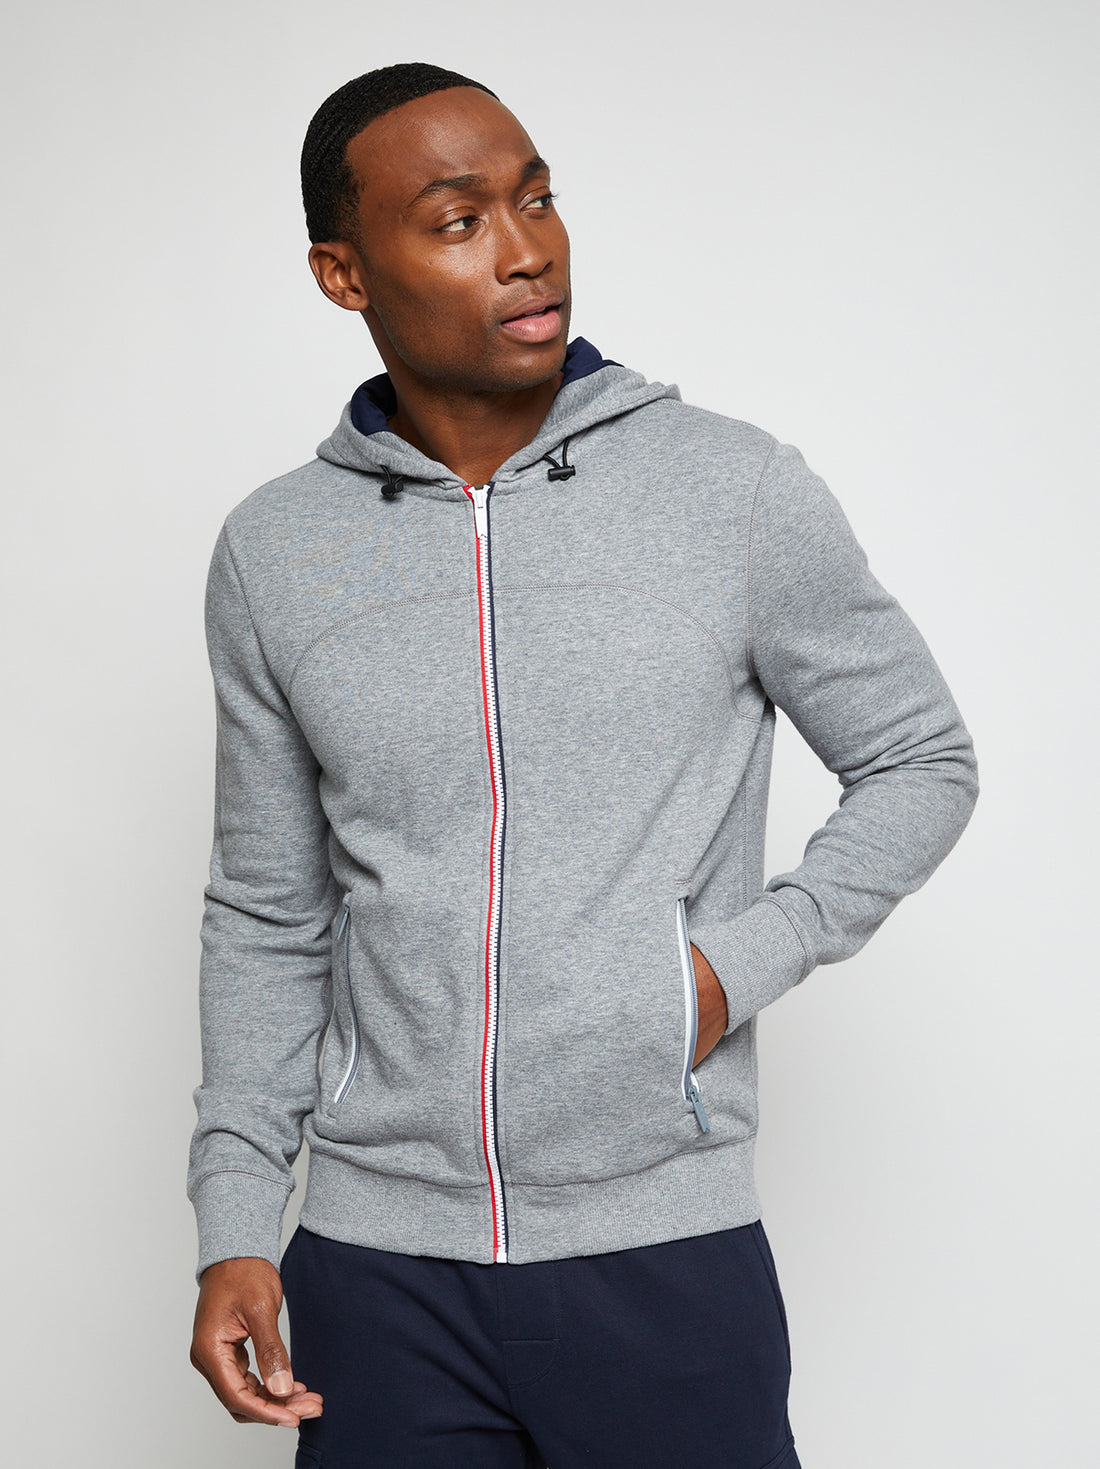 The Rush Hoodie - Our Best Selling Athletic Hoodie - Fourlaps